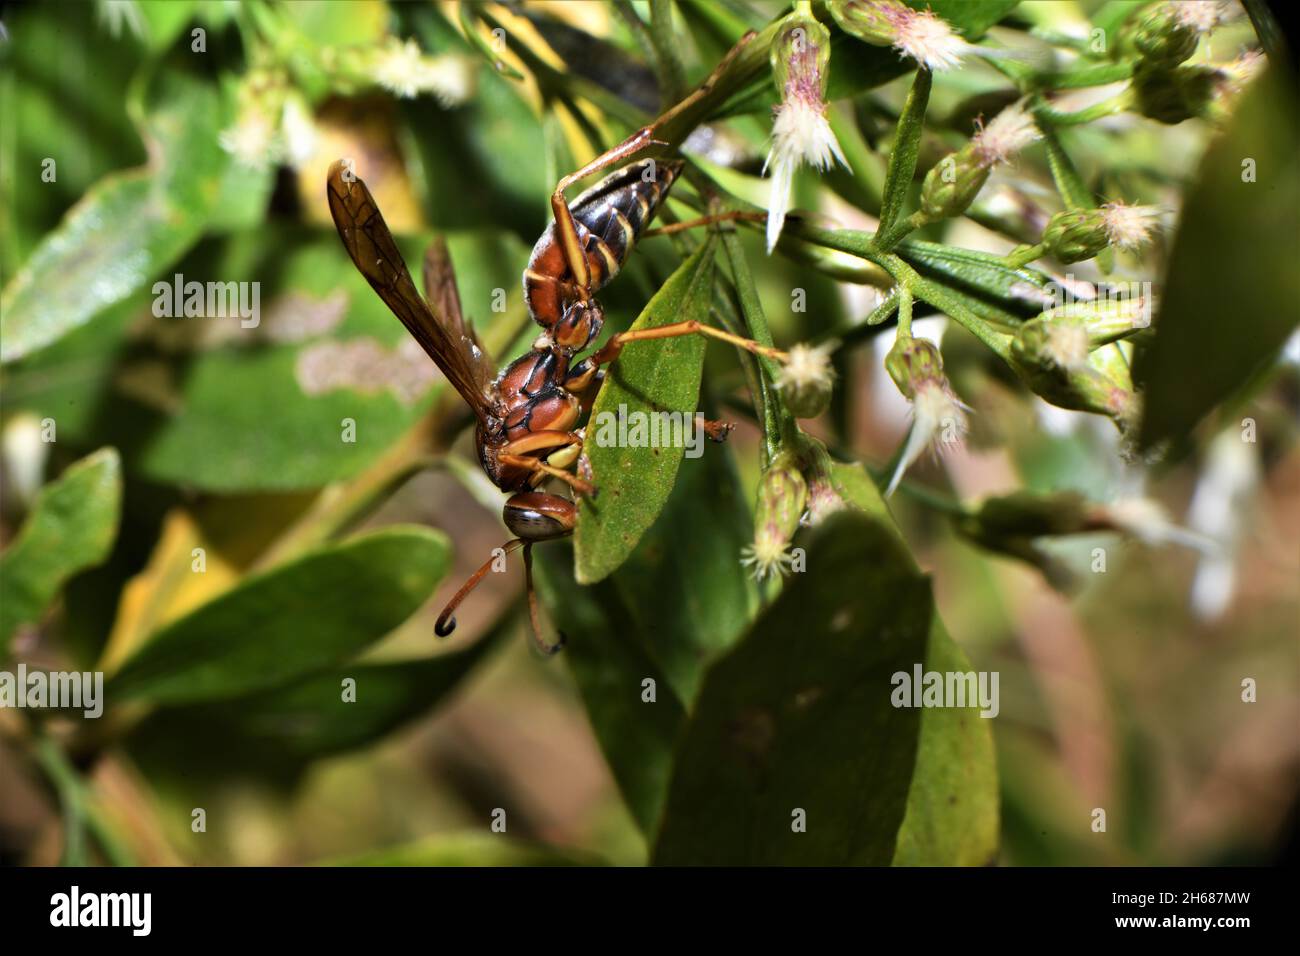 A paper wasp. Stock Photo